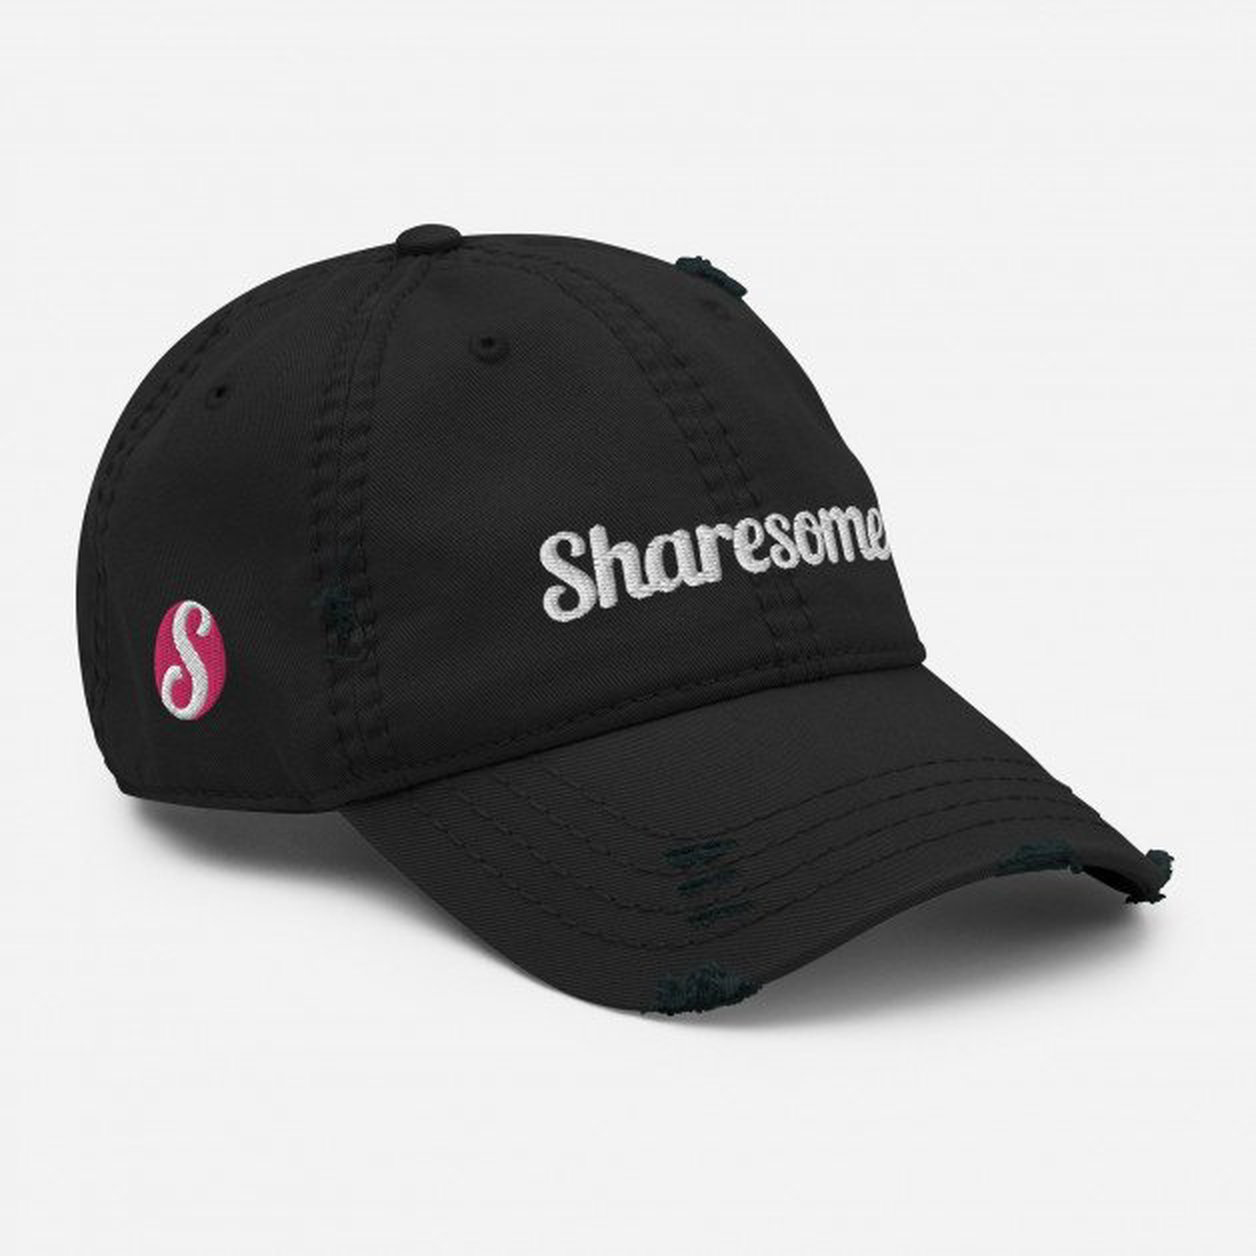 Photo by SharesomeLove with the username @SharesomeLove, who is a brand user,  October 15, 2023 at 9:29 AM. The post is about the topic SharesomeLove and the text says 'Expand your headwear collection with this fashionable Sharesome dad hat. With a slightly distressed brim and crown fabric, it’ll add just the right amount of edge to your look. For a quick and easy outfit pair it with slacks, your favorite jeans, and a..'